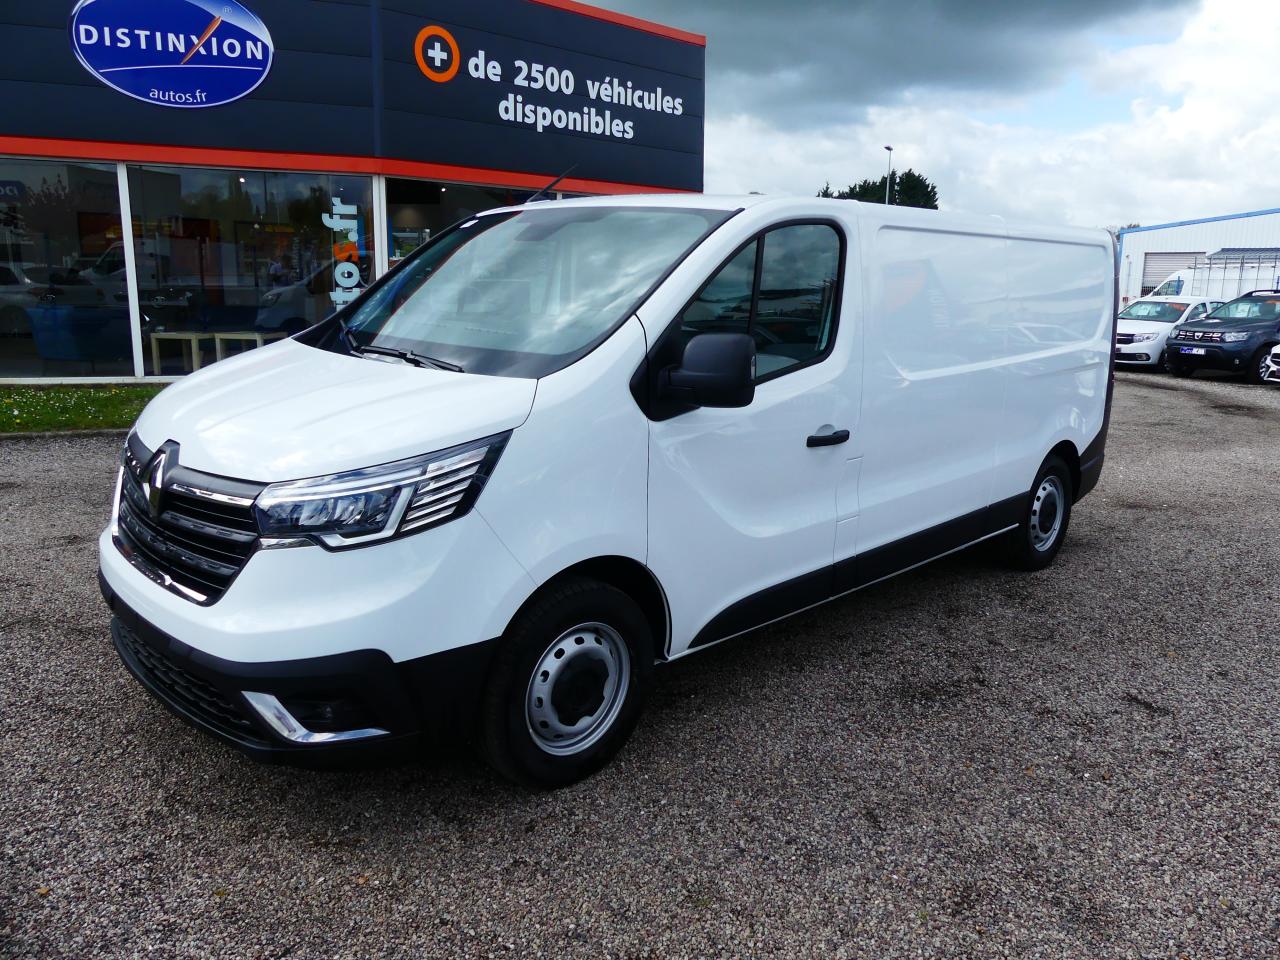 RENAULT-TRAFIC-Trafic L2H1 3000 Kg 2.0 Blue dCi - 150  III FOURGON Fourgon Confort L2H1 PHASE 3